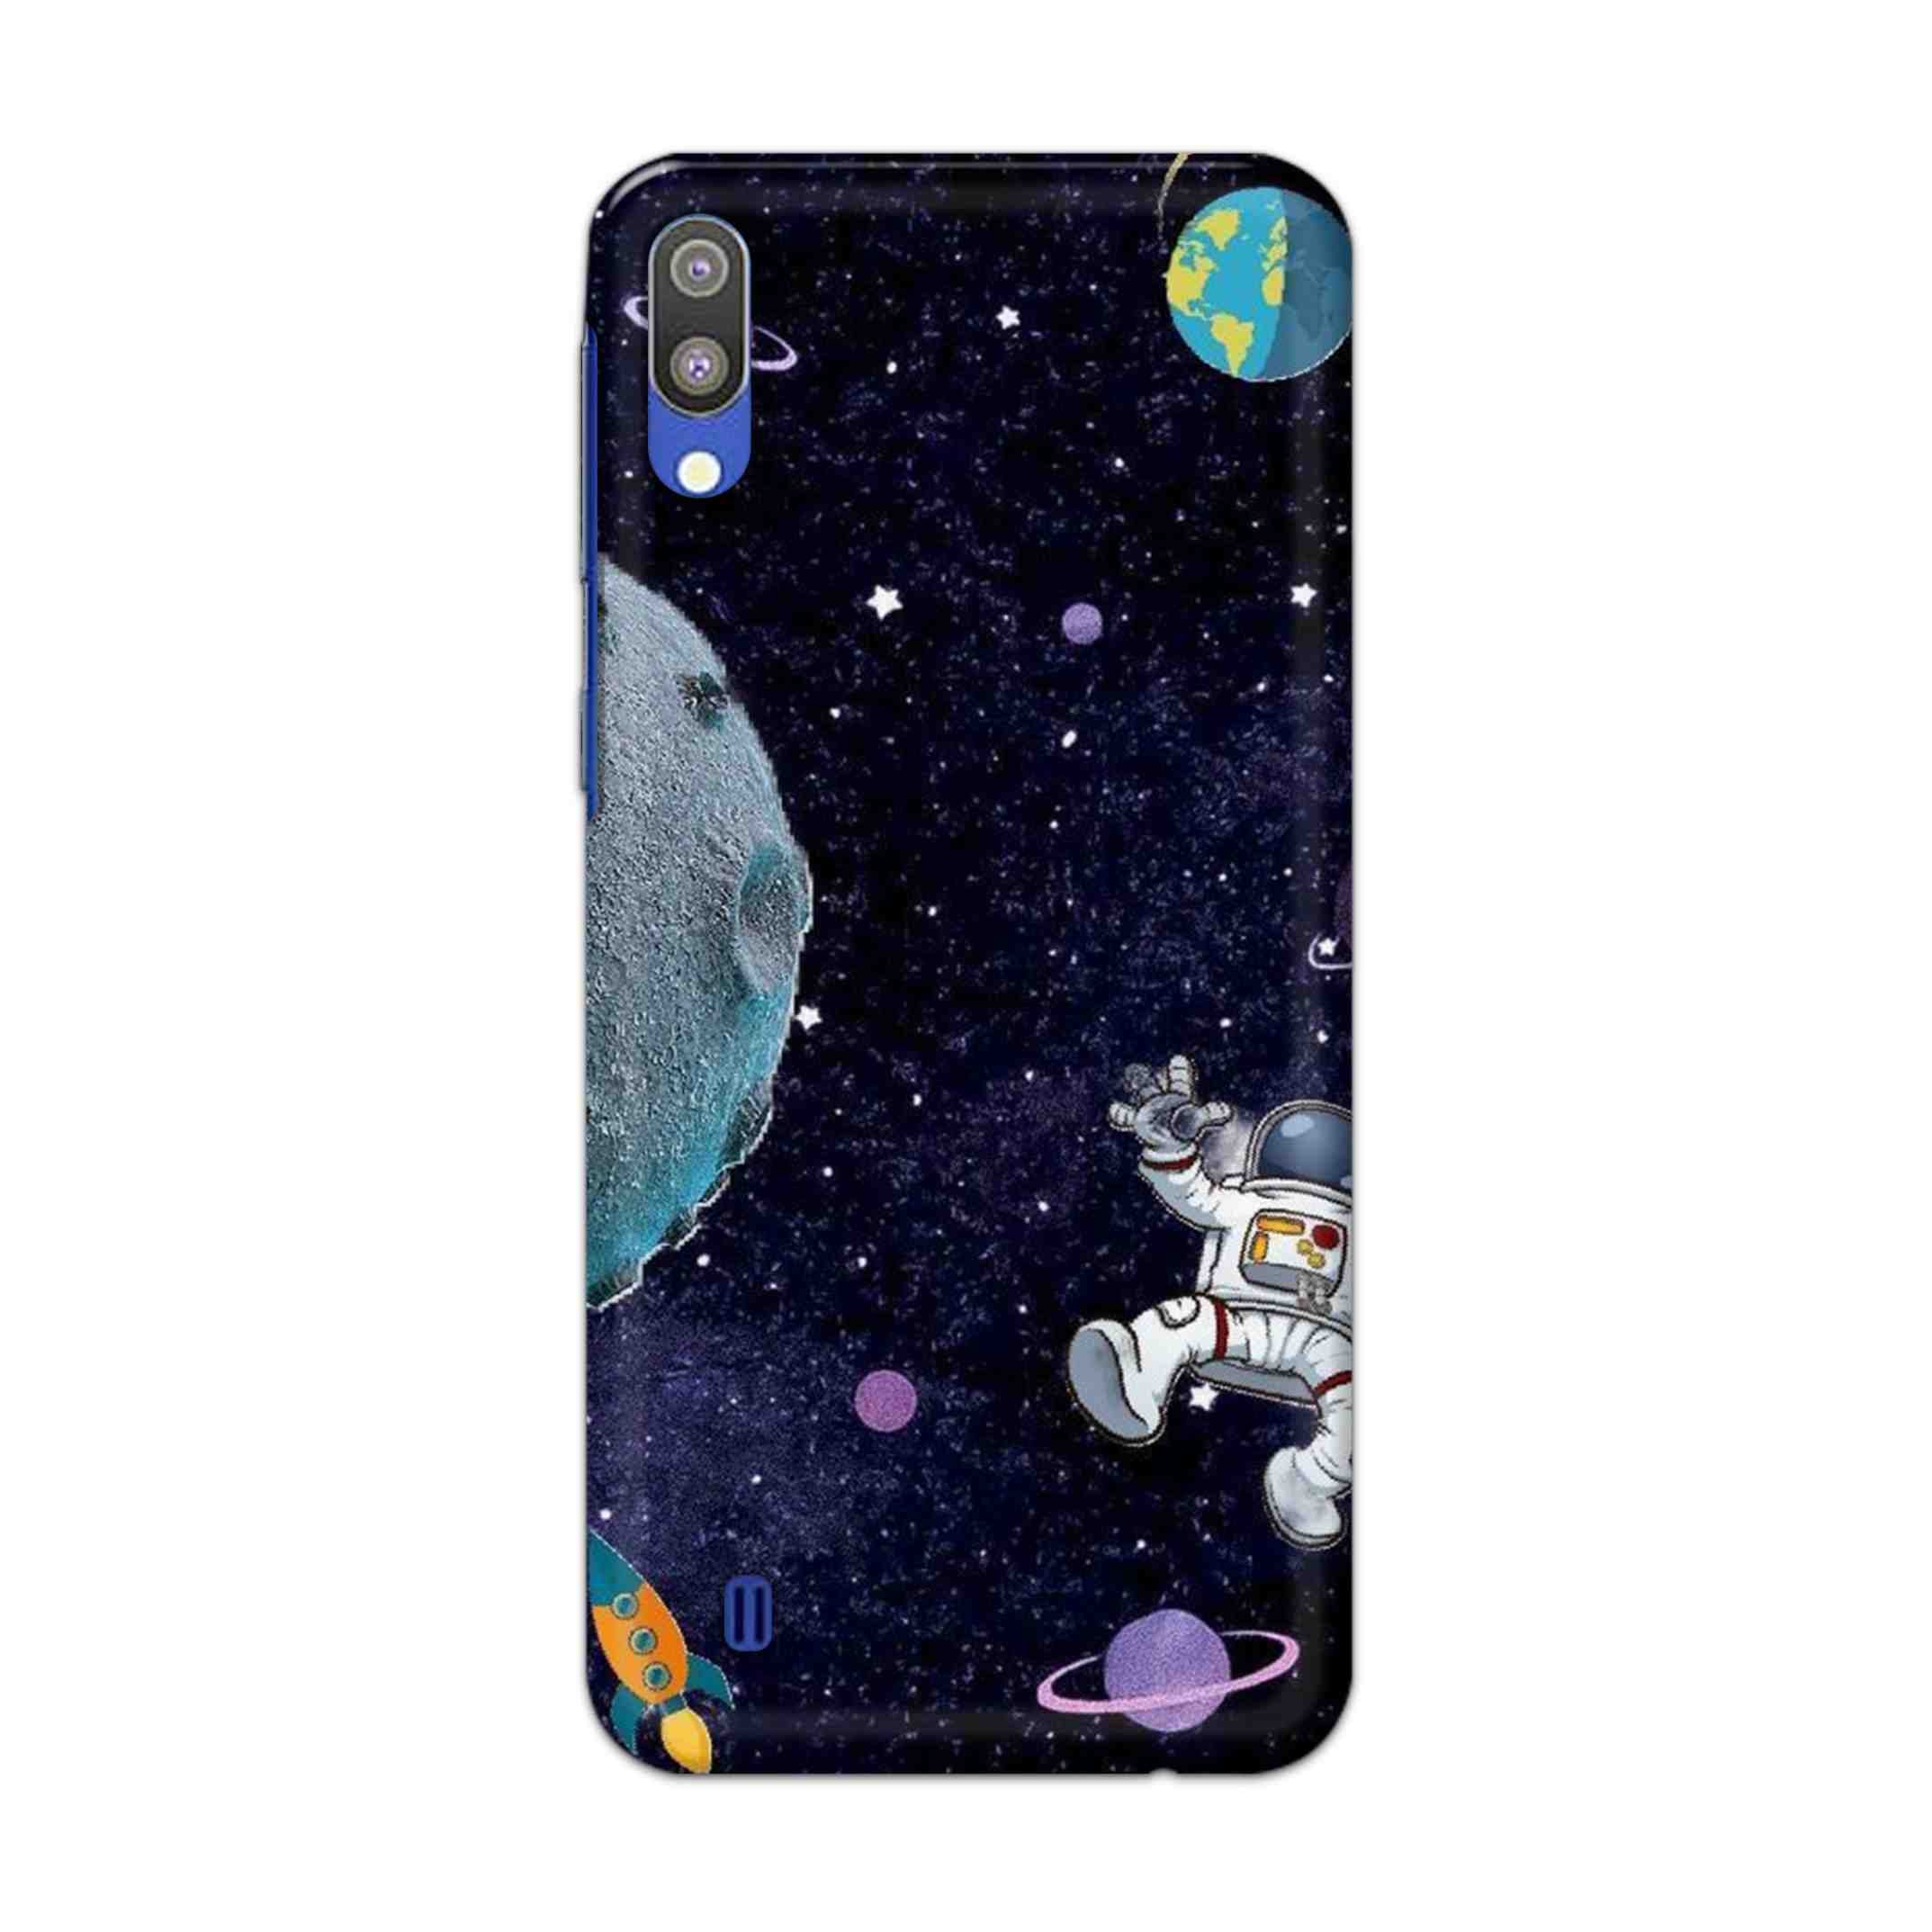 Buy Space Hard Back Mobile Phone Case Cover For Samsung Galaxy M10 Online